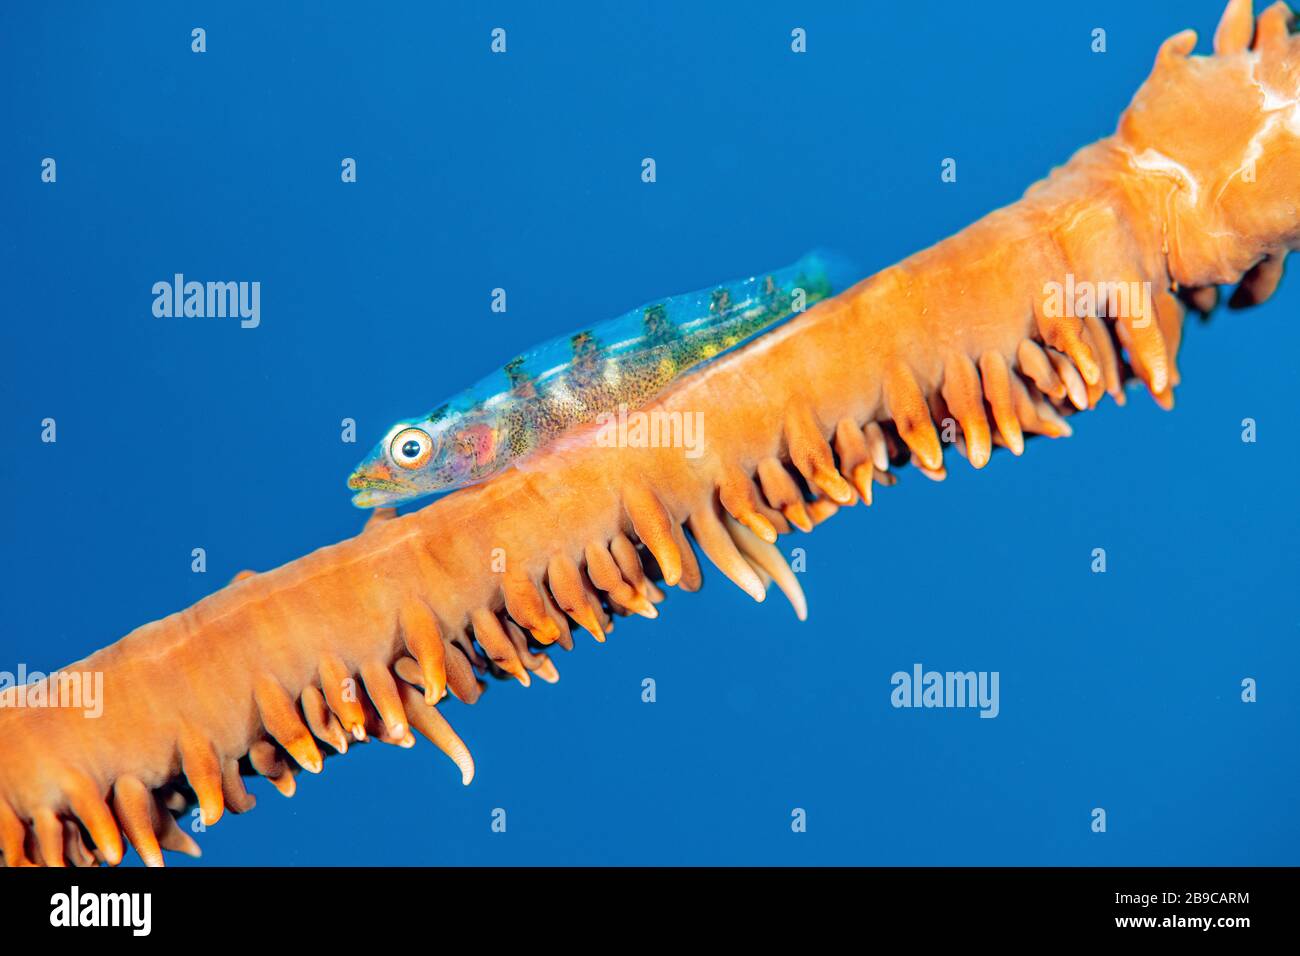 A whip coral goby against the blue sea, Anilao, Philippines. Stock Photo